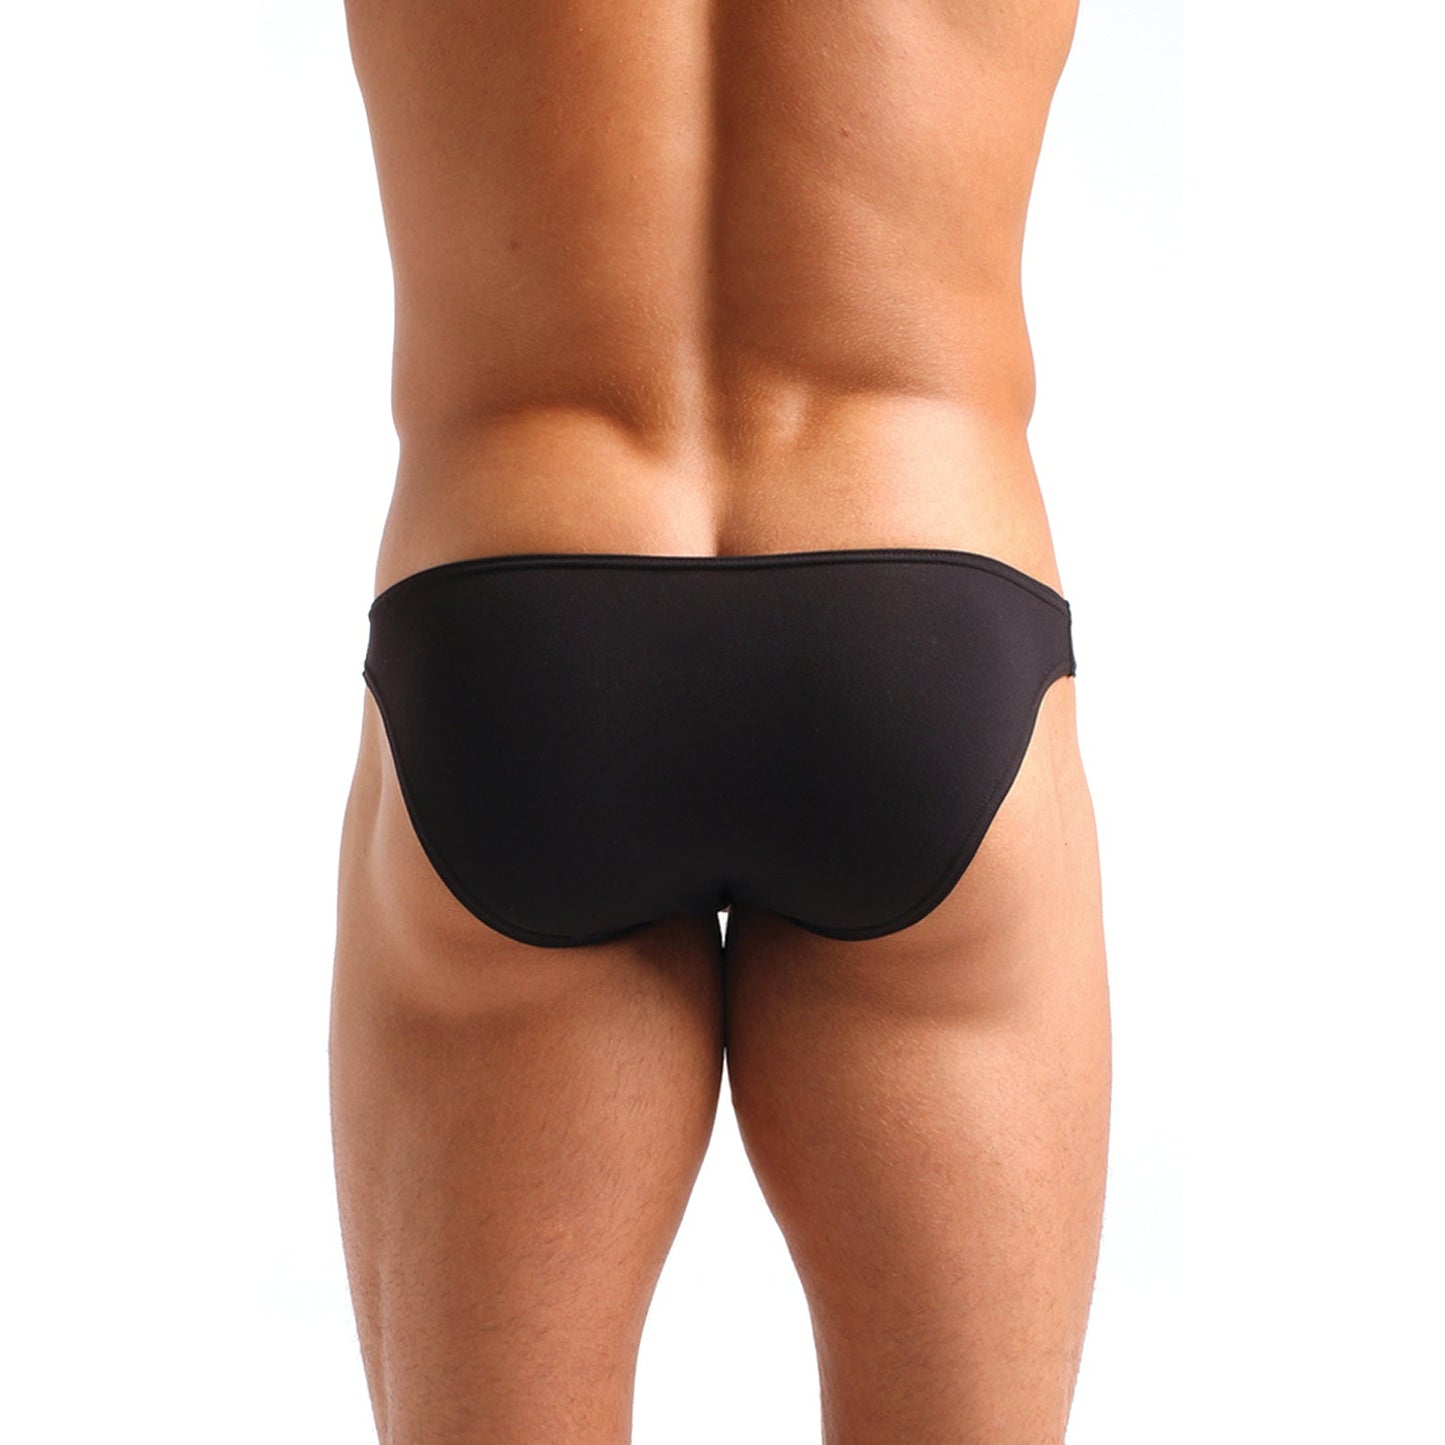 Cocksox Enhancing Pouch Brief Black Outback